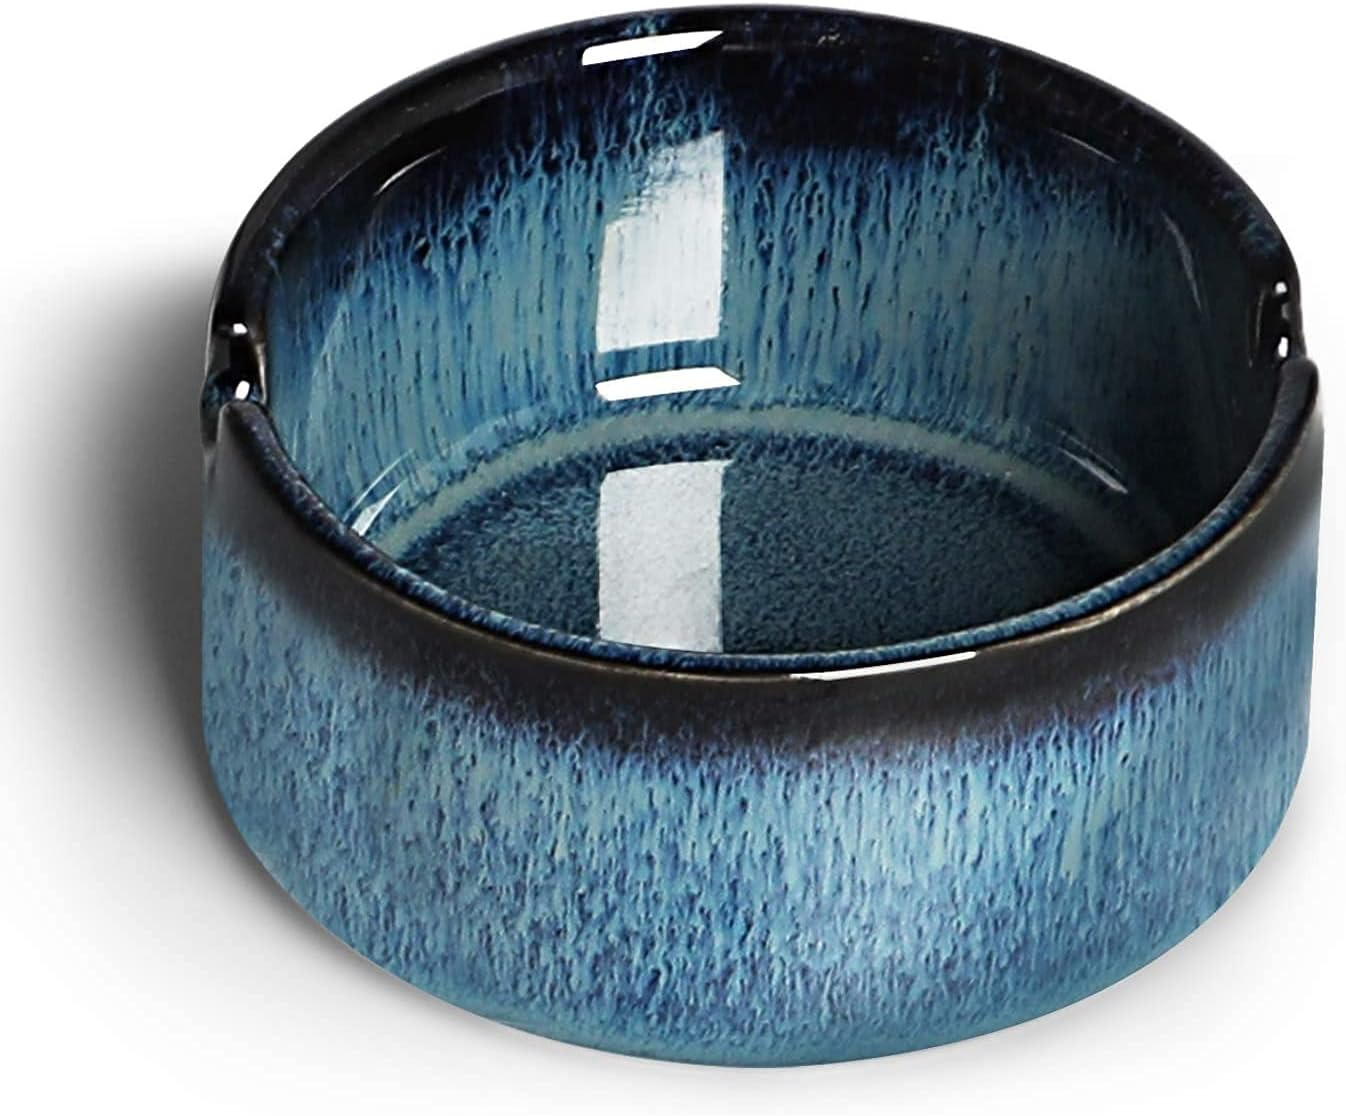 Small Ceramic Ashtray for Smokers Home Decoration Gift Set of 2 (Gradient Blue)